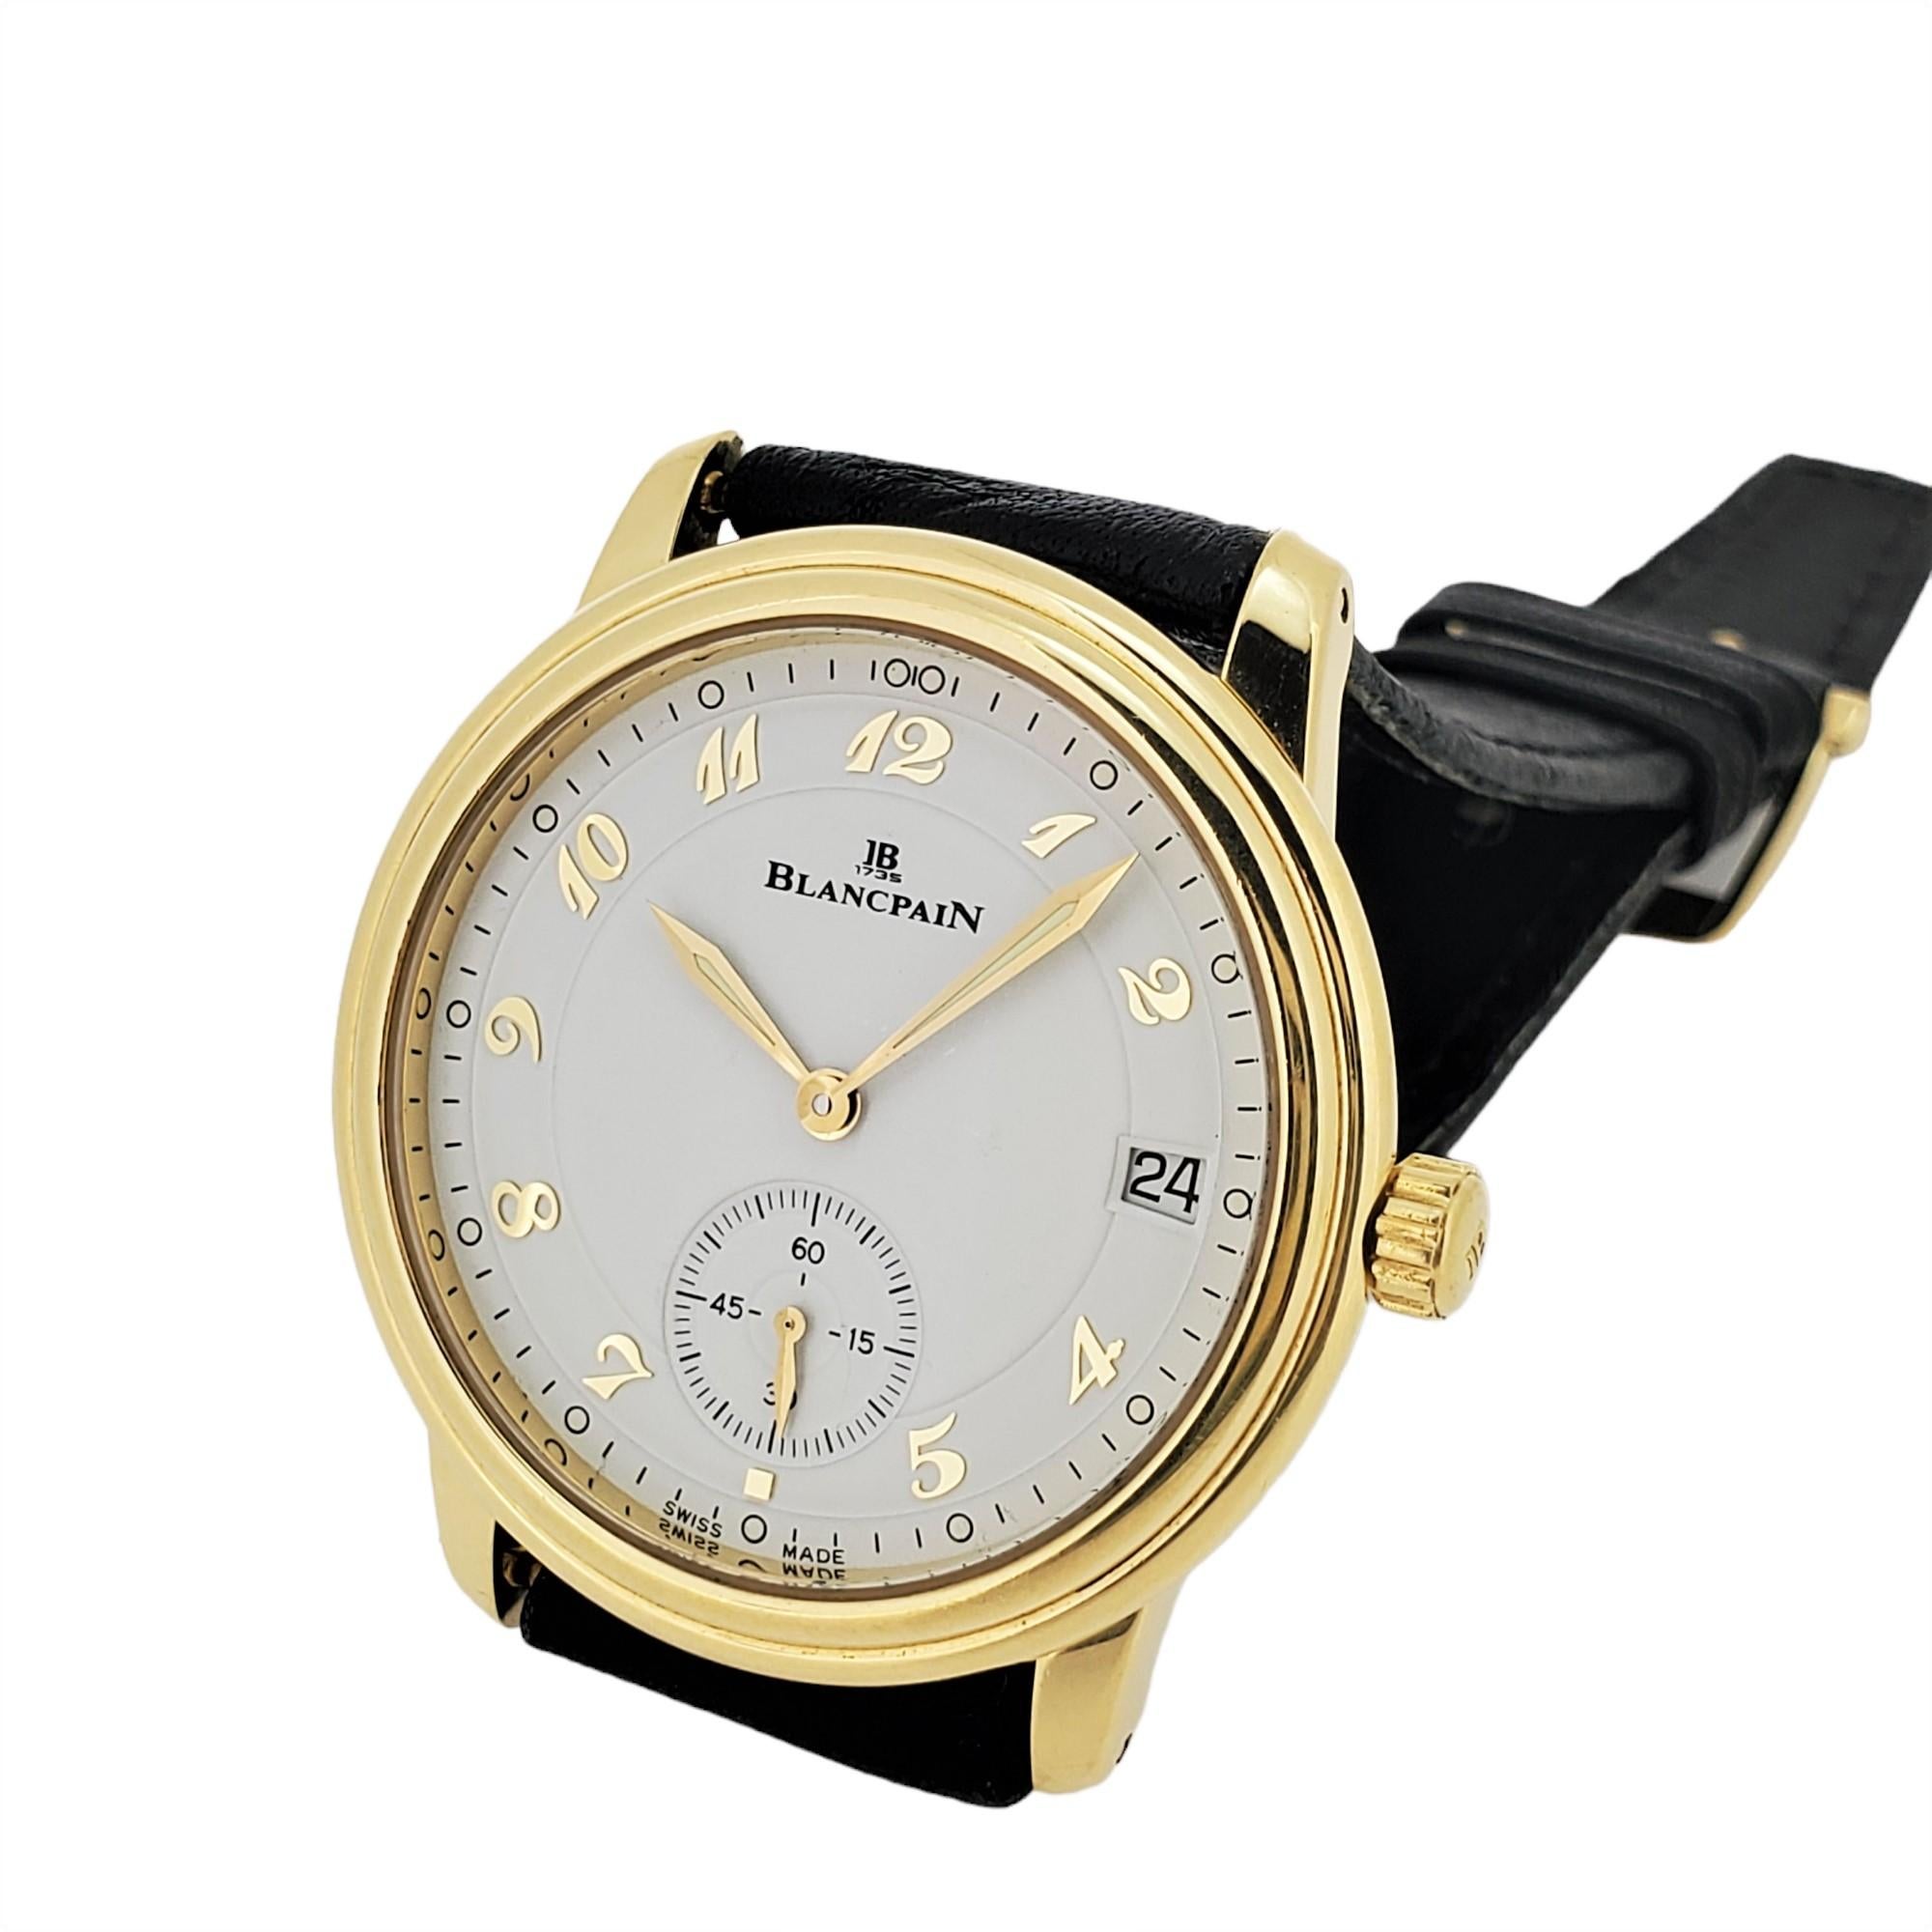 Modern Blancpain Limited Edition Extra Slim Automatic Porcelain Breguet Dial, Circ 1995 For Sale